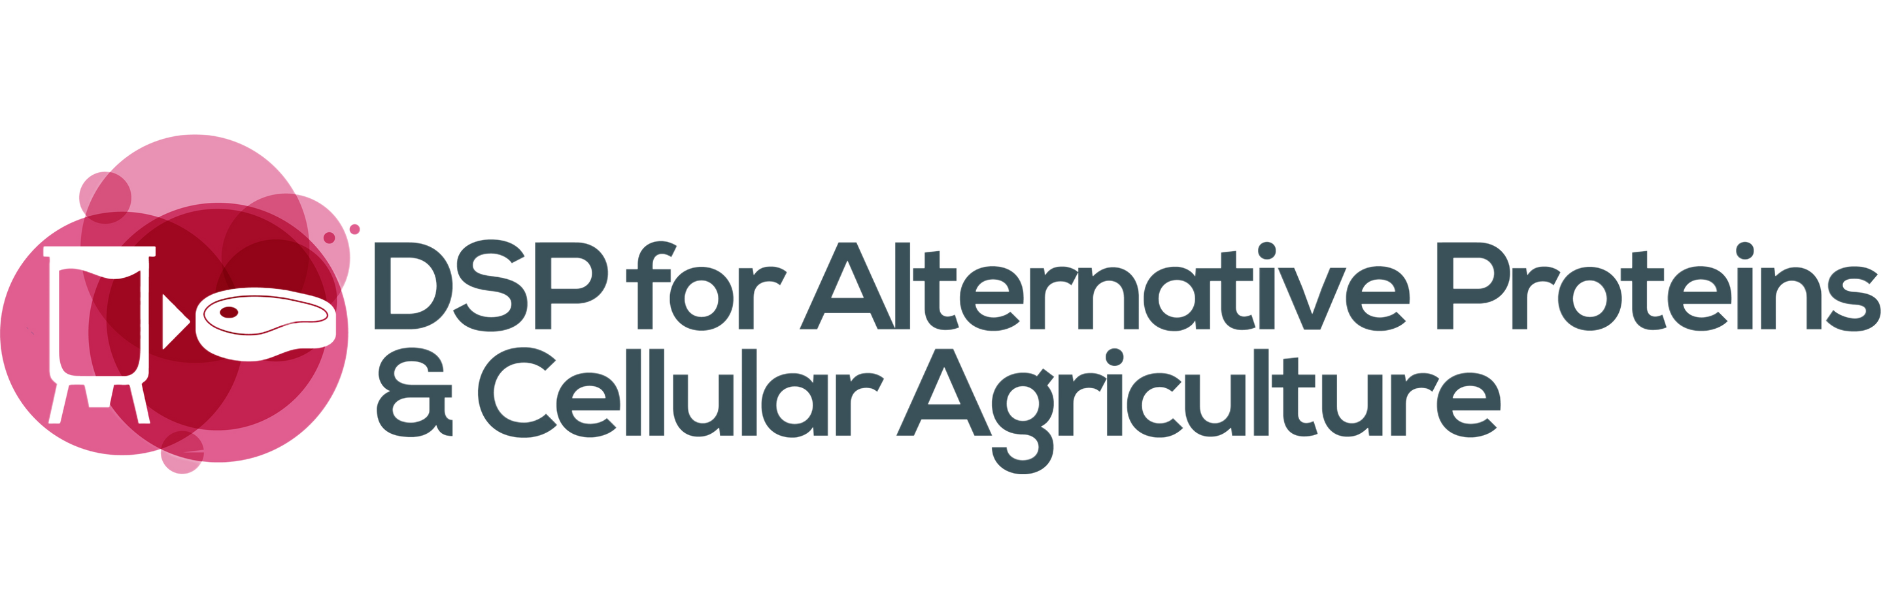 DSP for Alternative Proteins & Cellular Agriculture